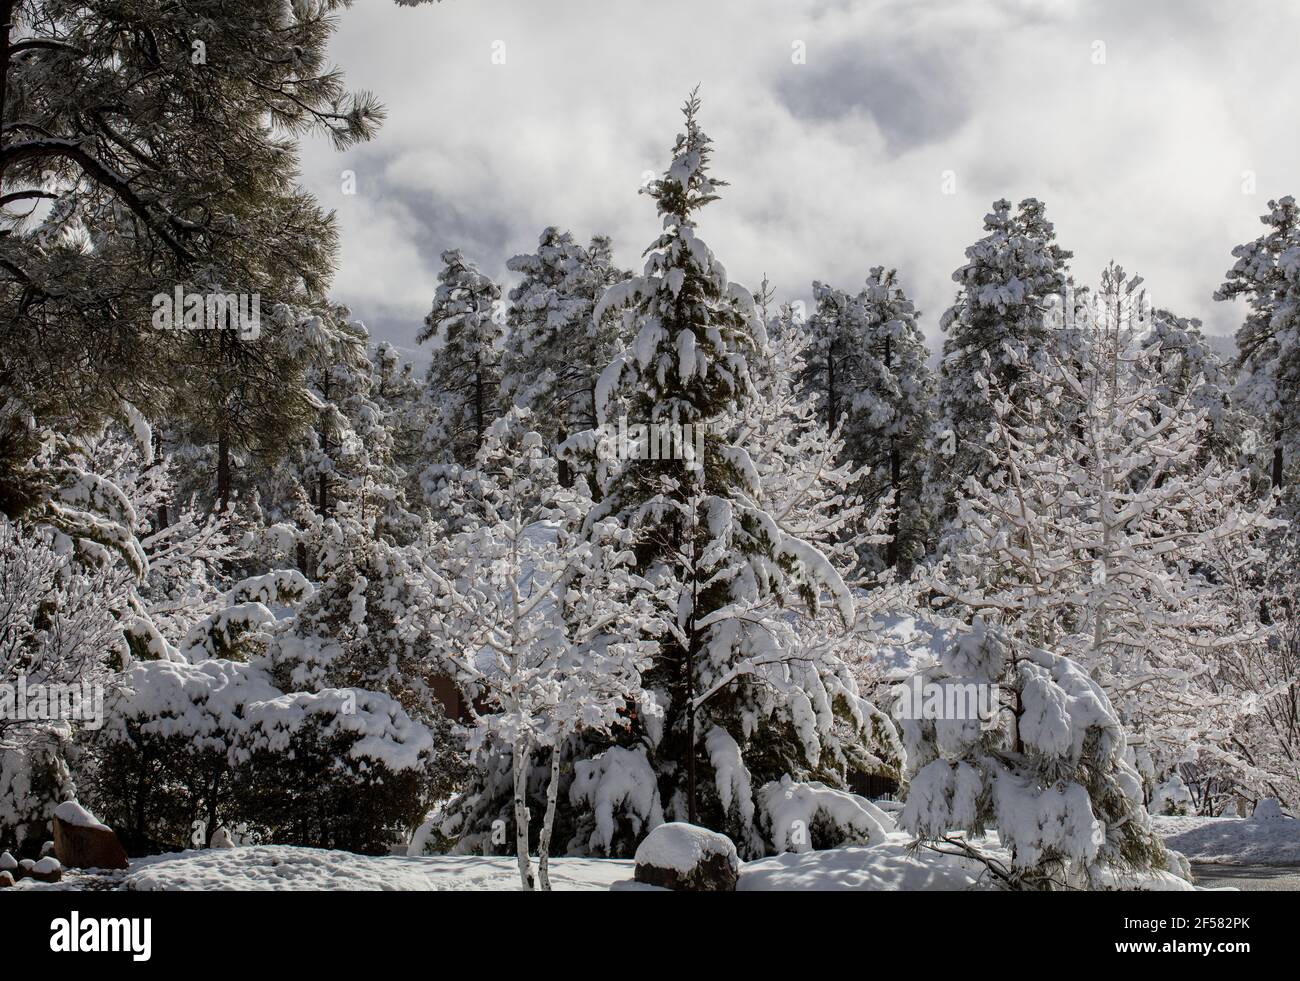 Ponderosa Pines and Cedar covered in snow after a winter storm in Prescott Arizona Stock Photo